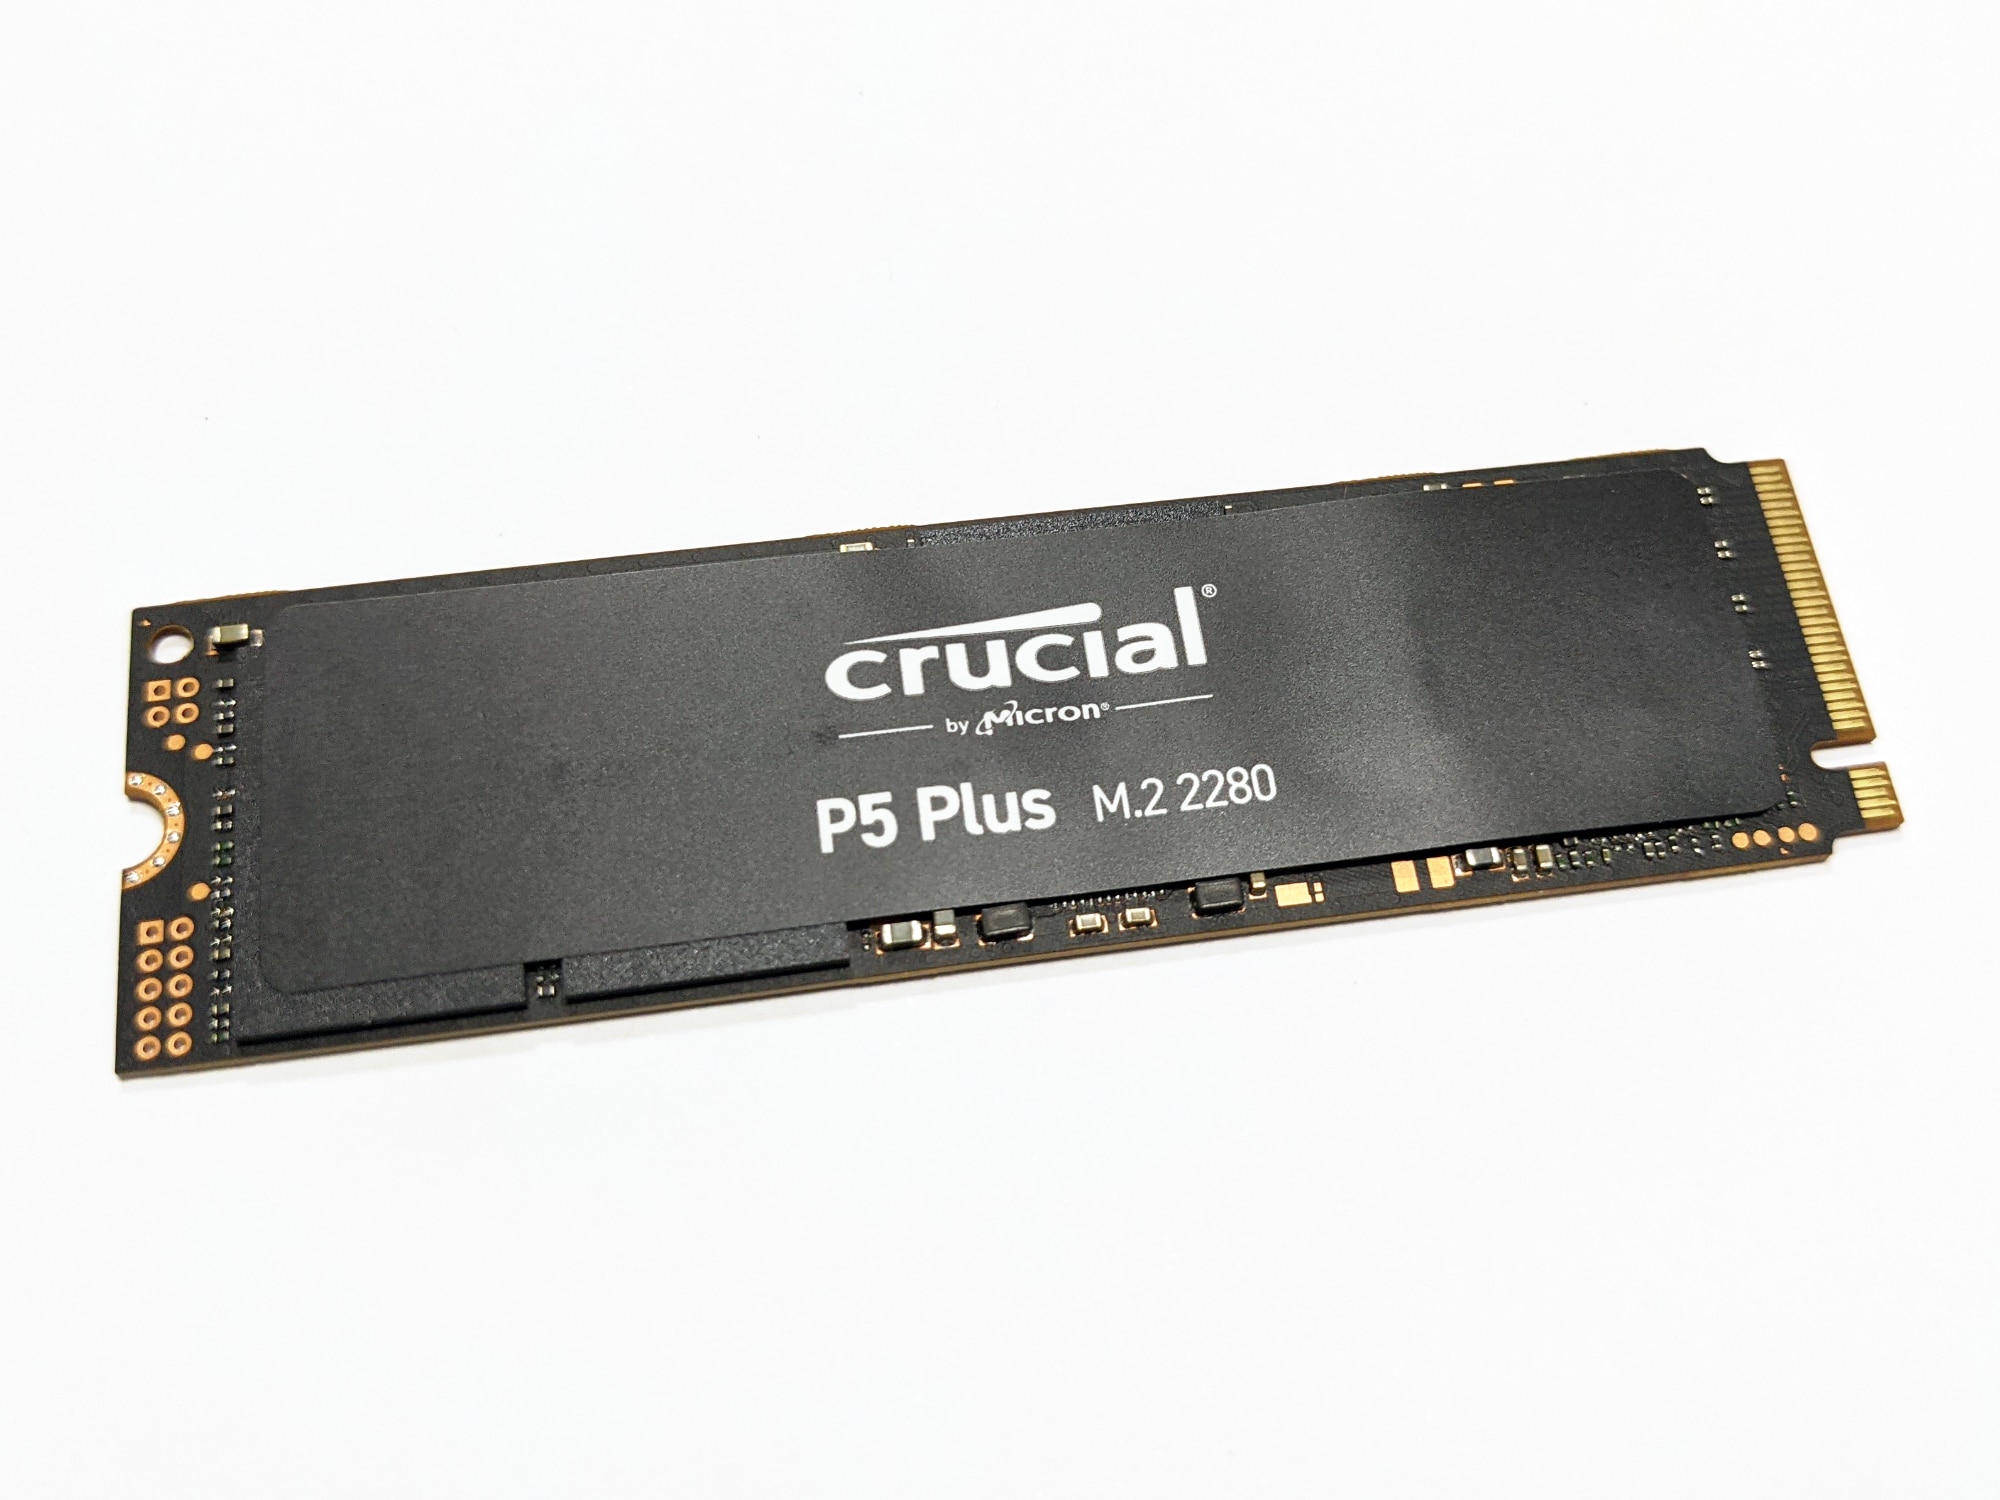 Crucial P5 Plus spotted in etail, Microns First PCIe 4.0 Consumer SSD